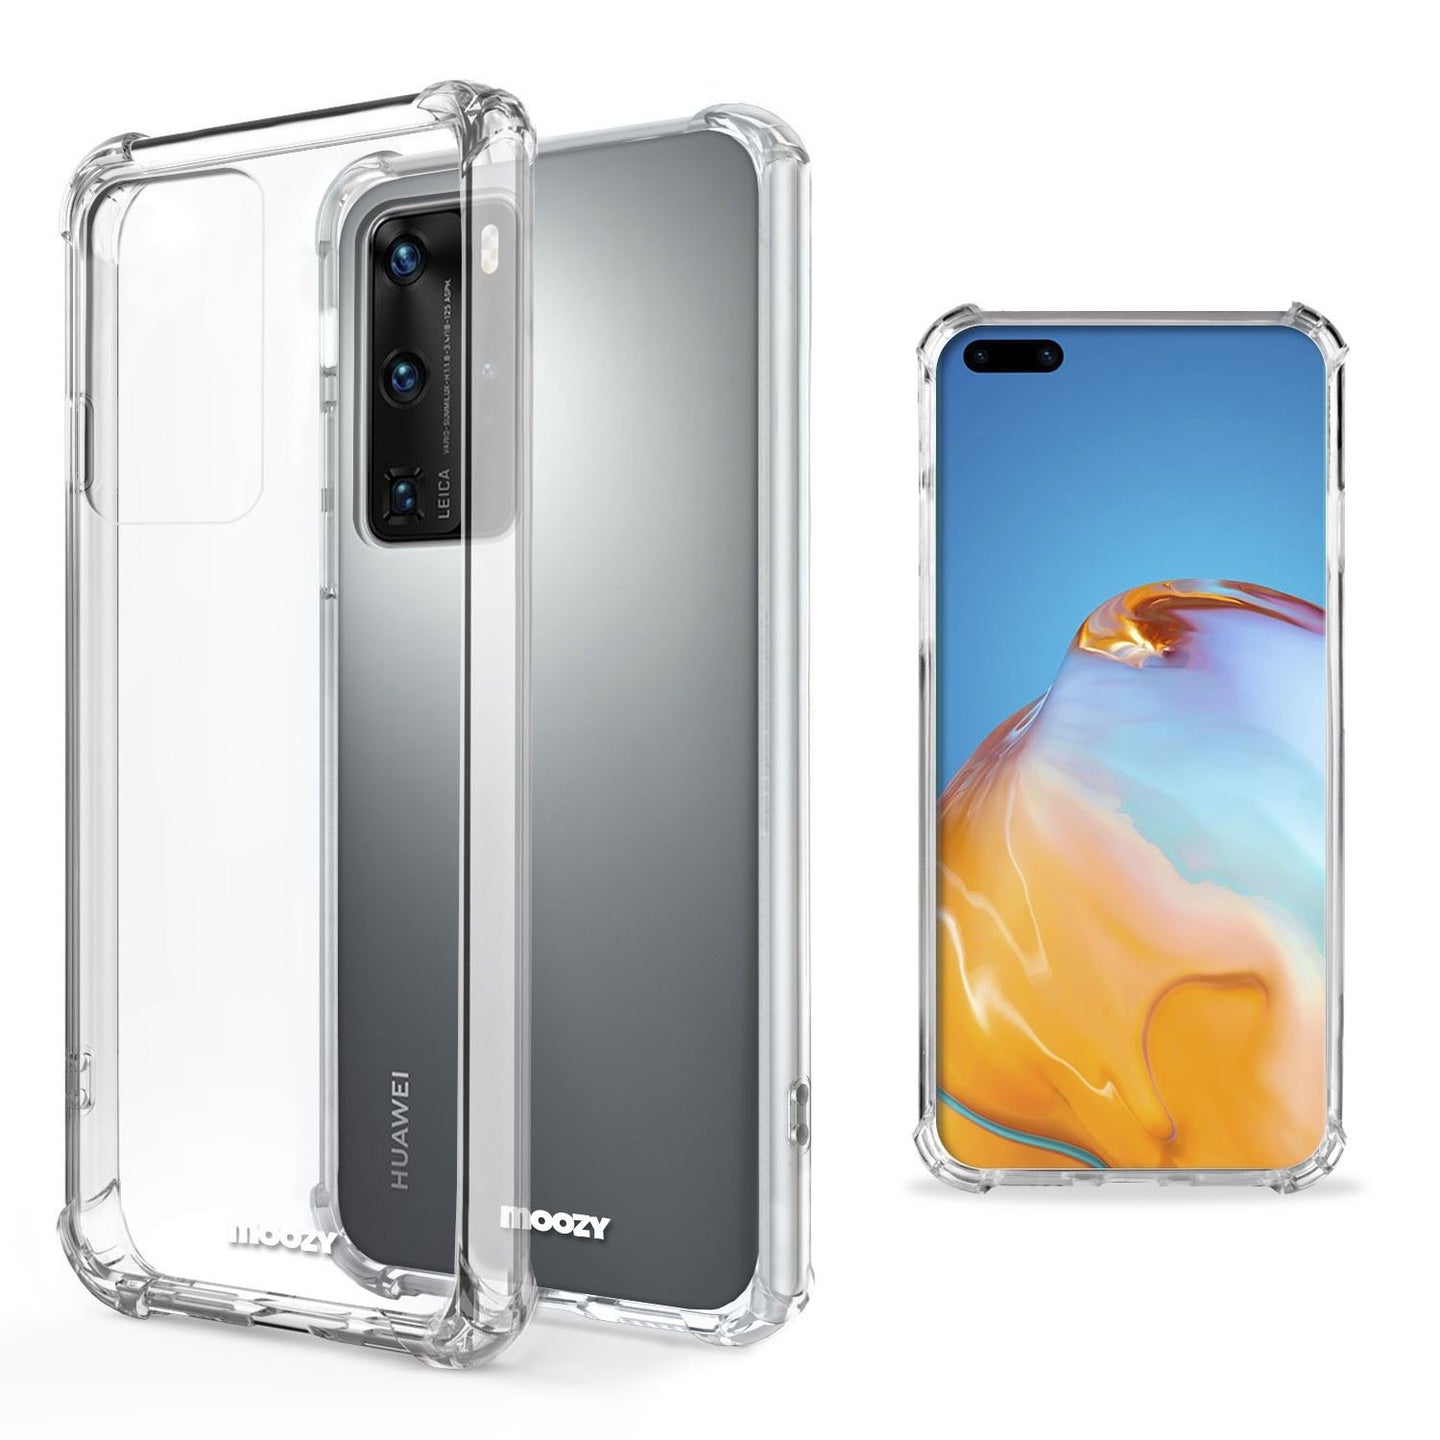 Moozy Shock Proof Silicone Case for Huawei P40 Pro - Transparent Crystal Clear Phone Case Soft TPU Cover